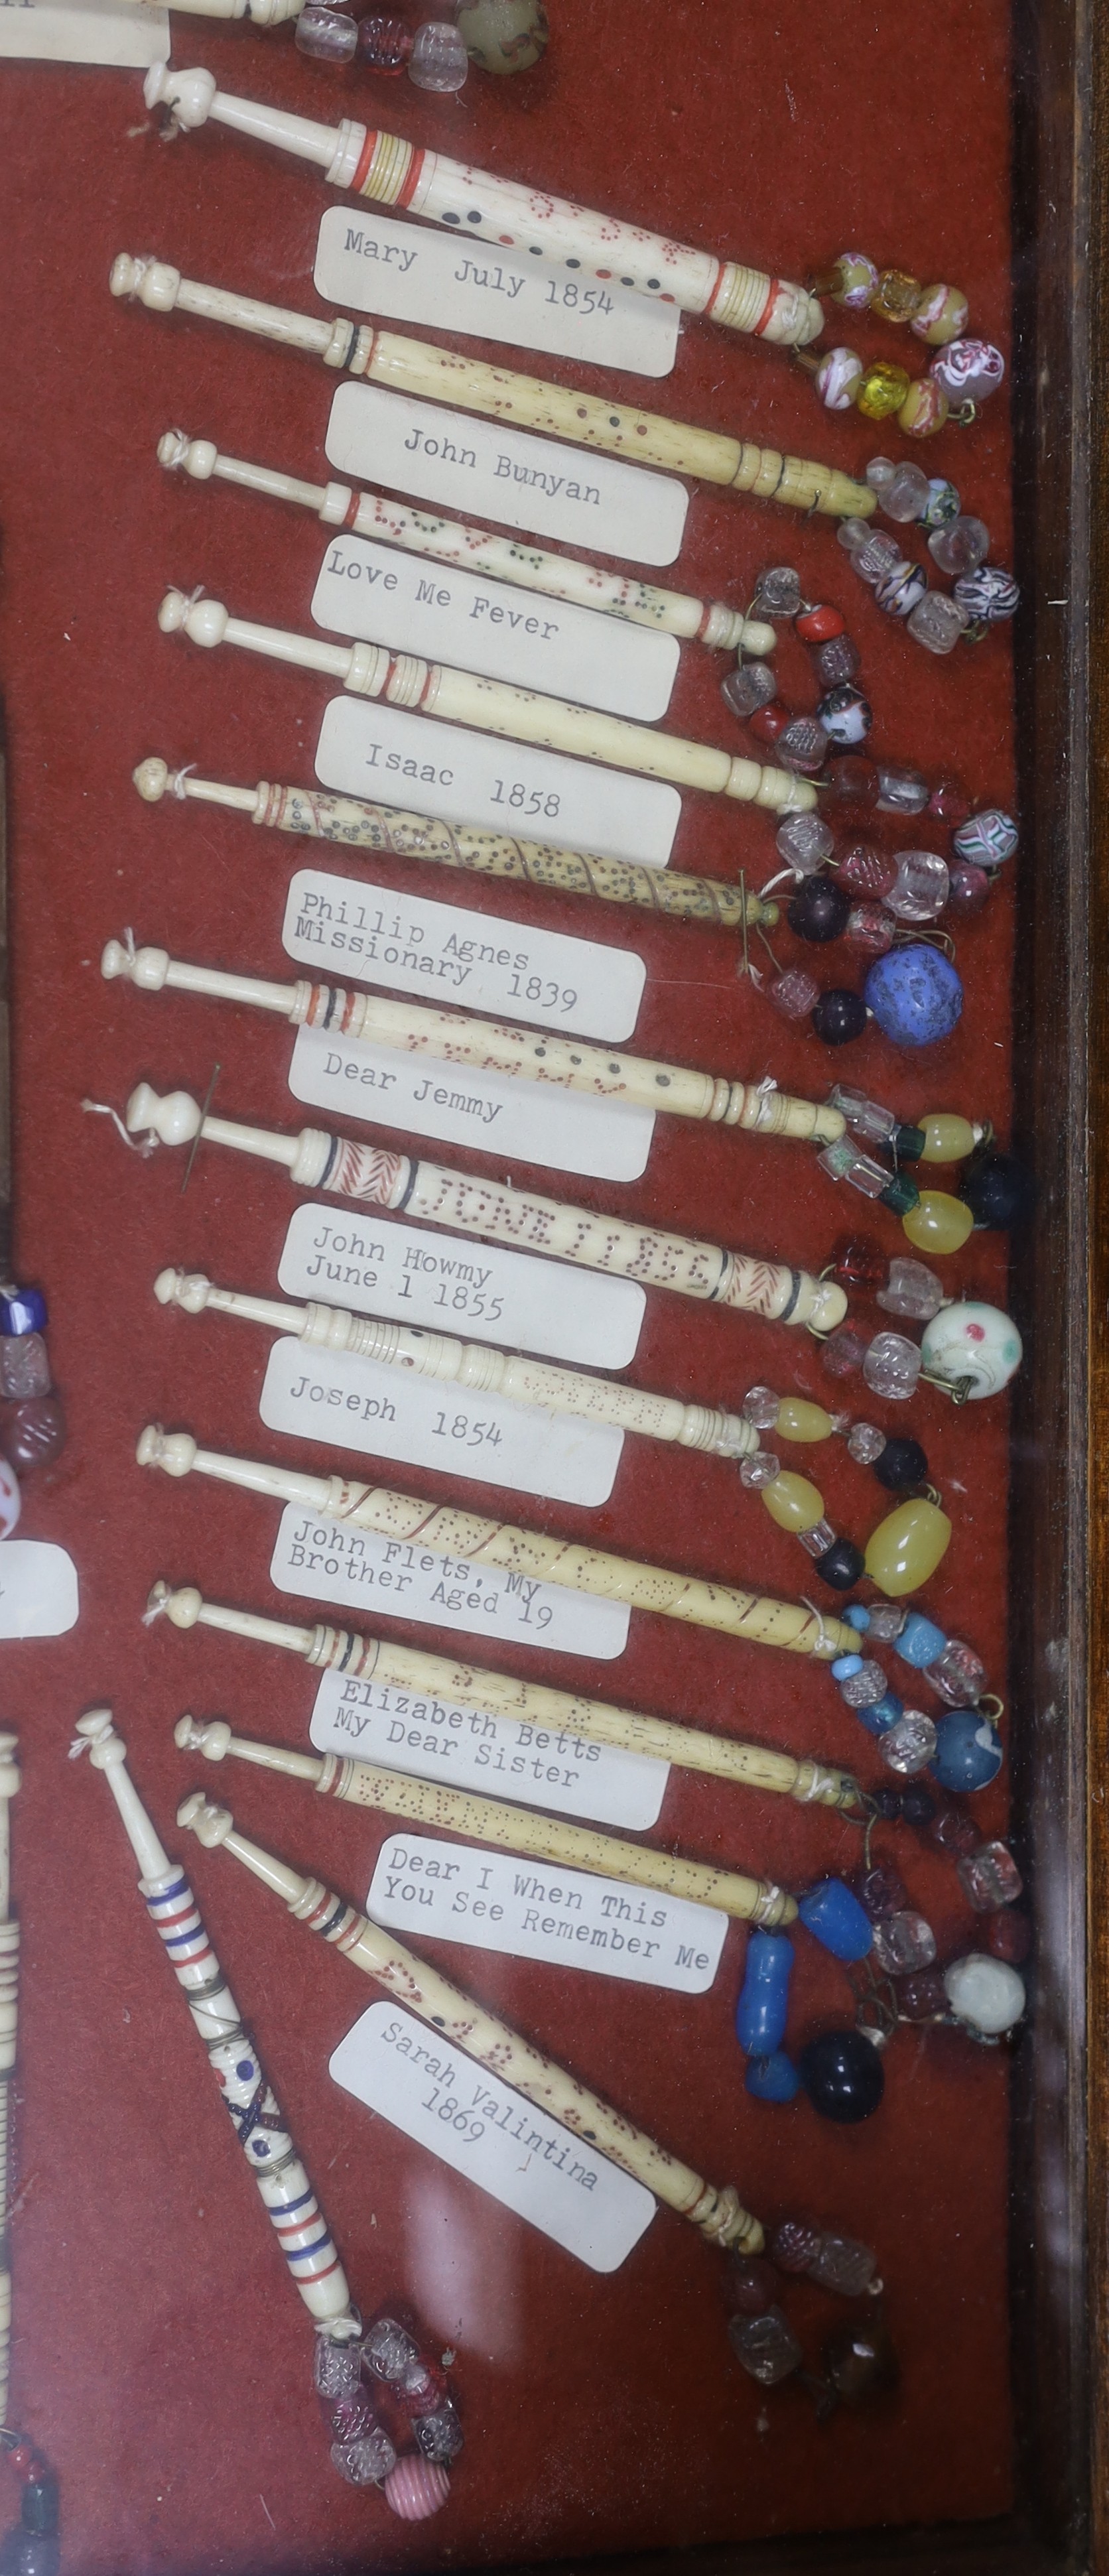 A cased collection of 19th century inscribed bone and glass bead lace bobbins, some dated and named